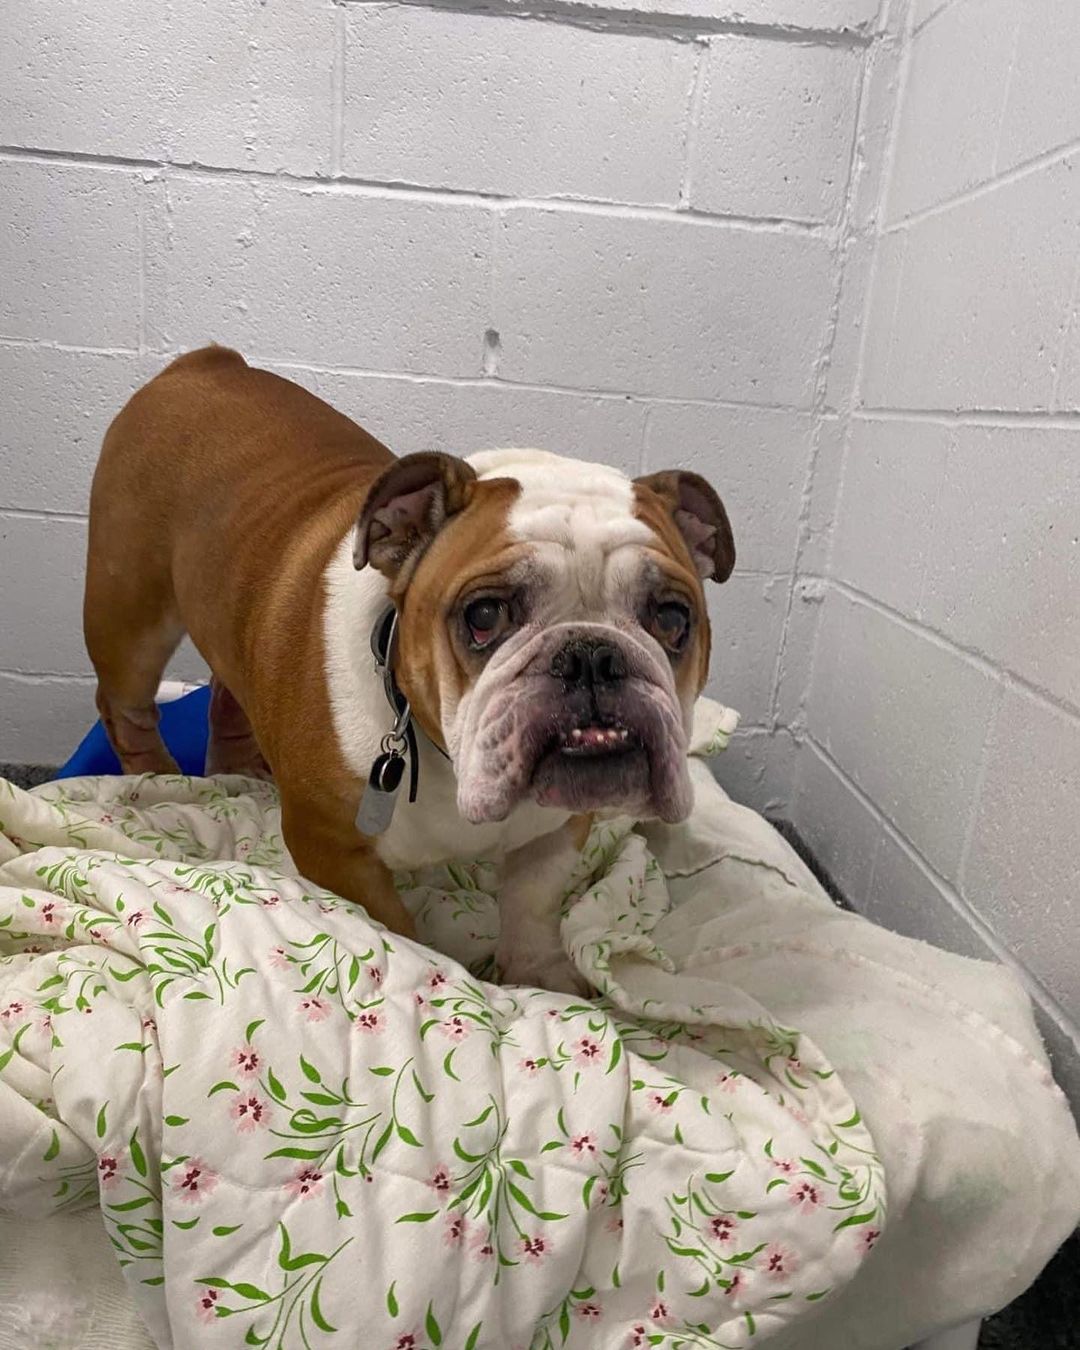 A shelter reached out to us about this kiddo and we welcomed him into foster care today 👏🏼❤️

Welcome, Beefy!

<a target='_blank' href='https://www.instagram.com/explore/tags/queencitybulldogrescue/'>#queencitybulldogrescue</a>